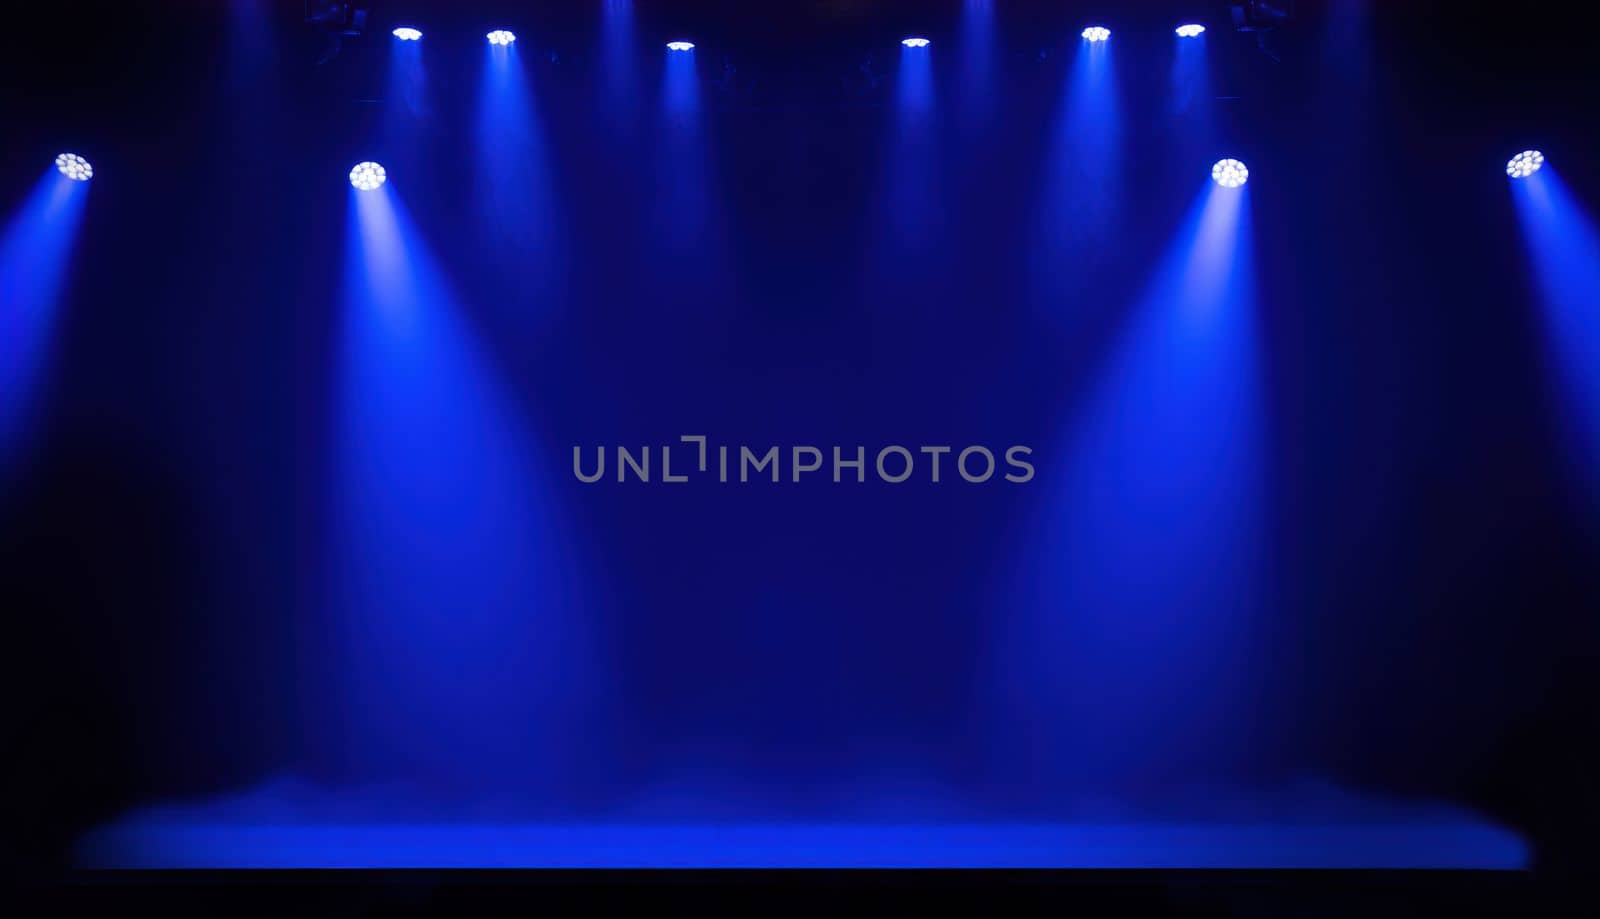 Light on a free stage, scene with blue spotlights on a background